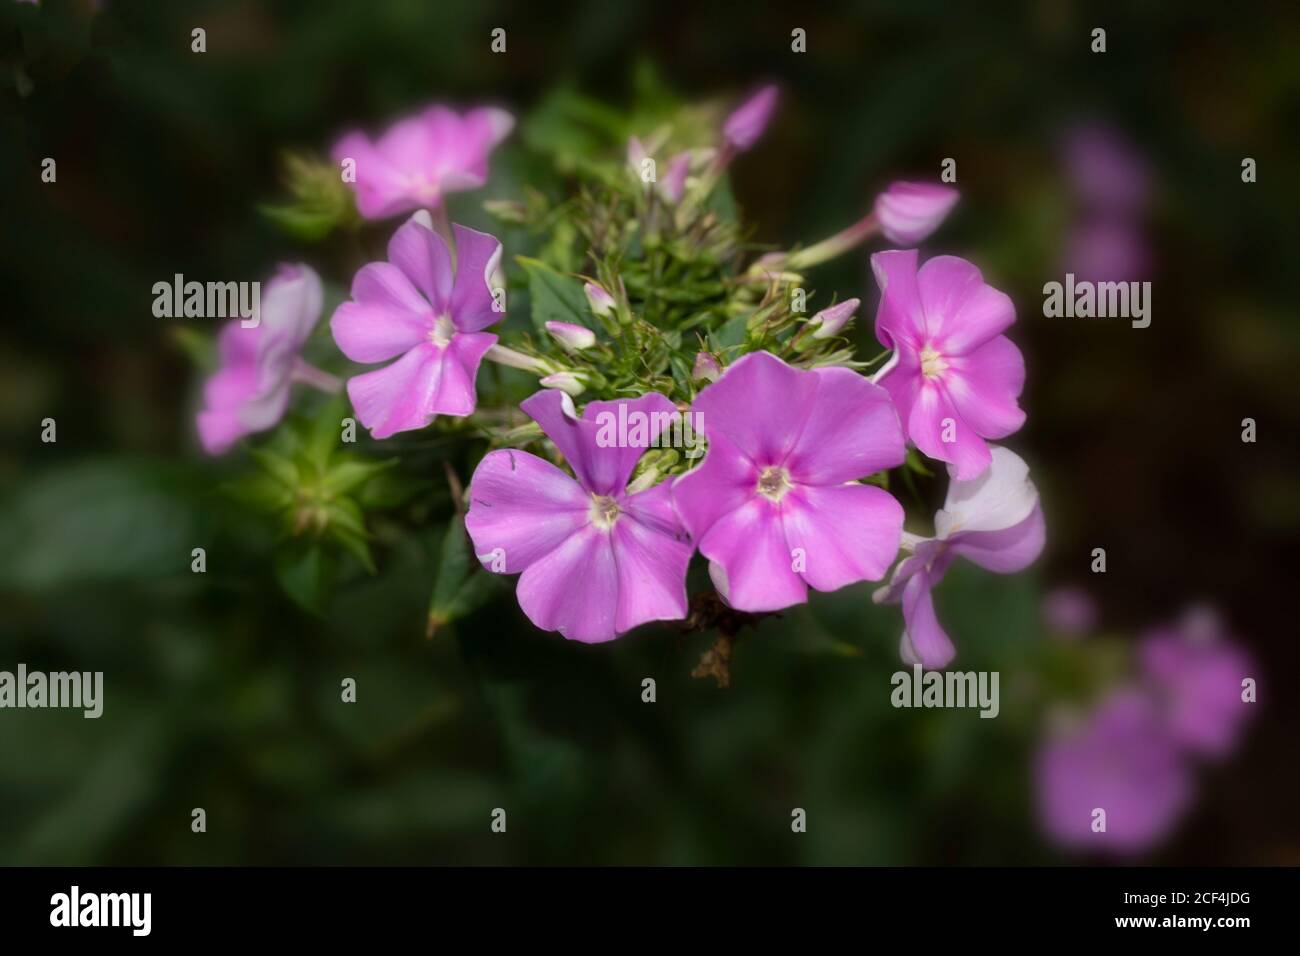 Phlox Paculata Eventide, natural close-up flower portrait Stock Photo